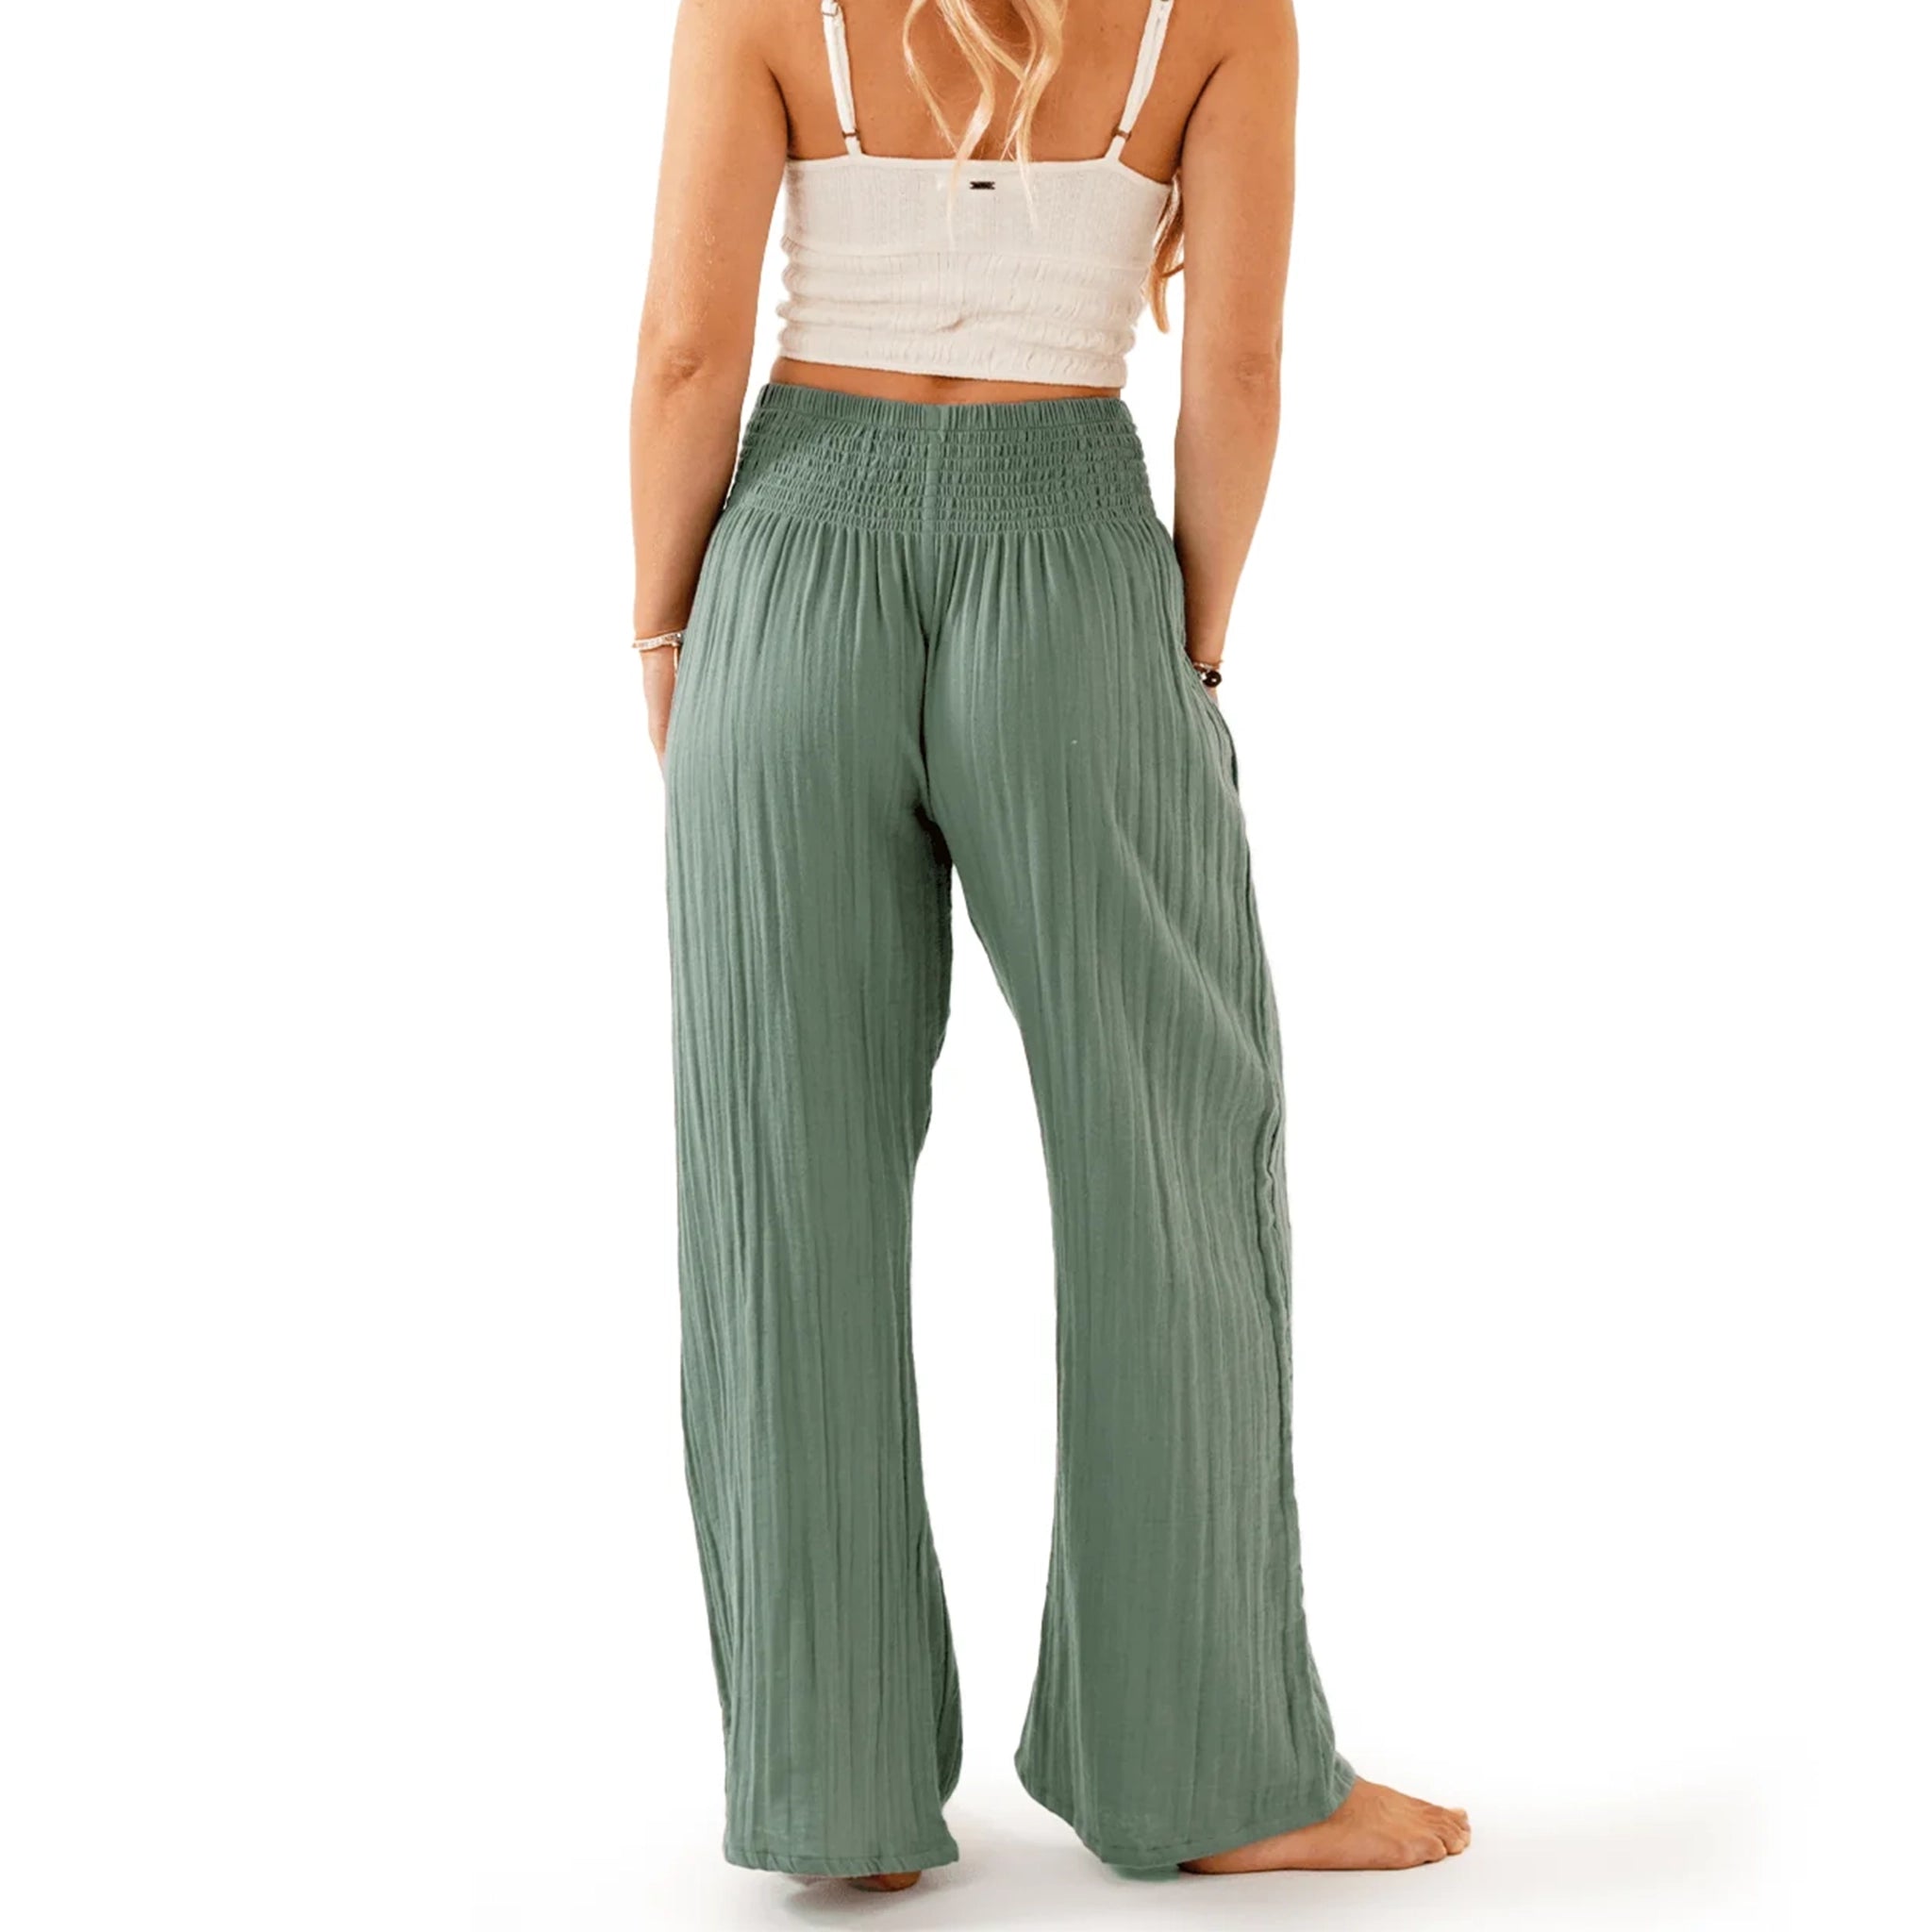 A model wearing a pair of wide leg, sage green pants with a stretchy elastic waistband. 